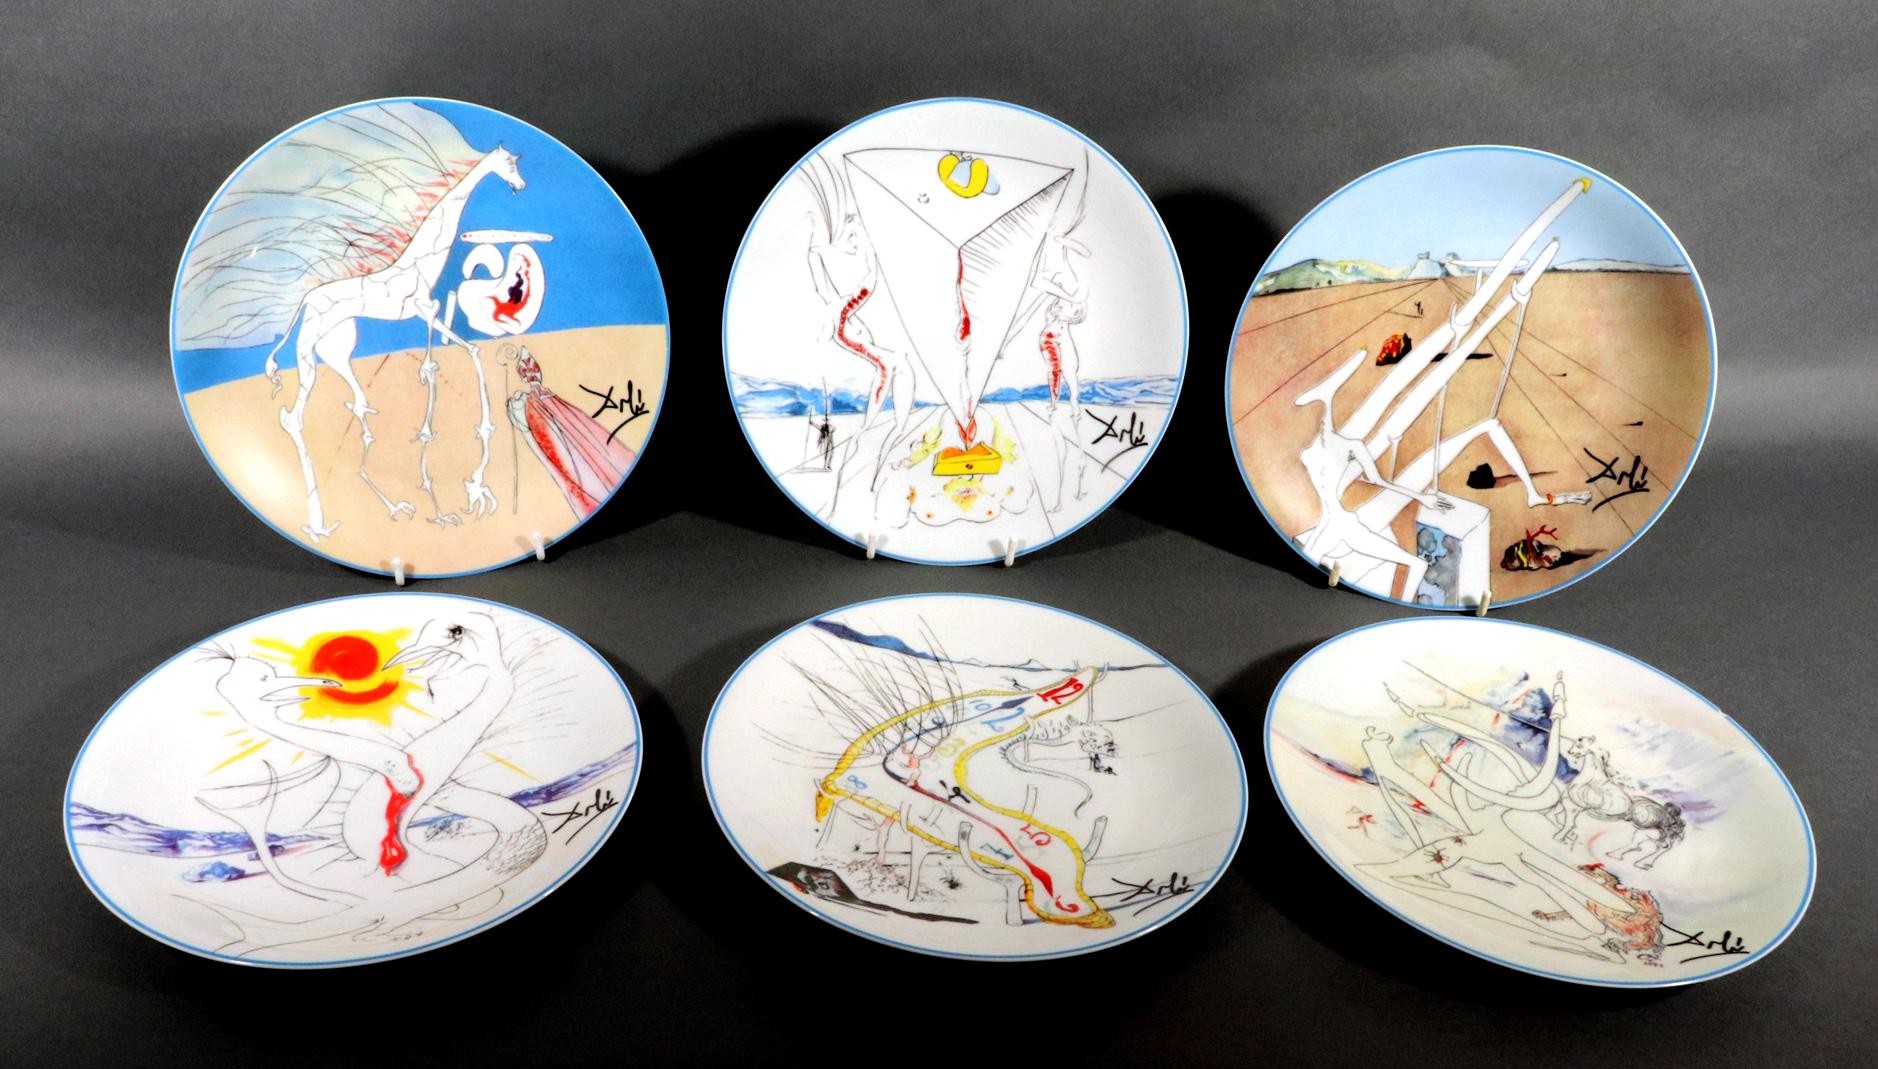 Set of Six Limoges Transfer-Printed Porcelain Cabinet Plates Designed by Salvador Dali,
''Le Conquete du Cosmos'' 
Limited Edition Number 1639/4000,
Dated 1974

The six plates, each with a different image, depict Salvador Dali's imagery of the